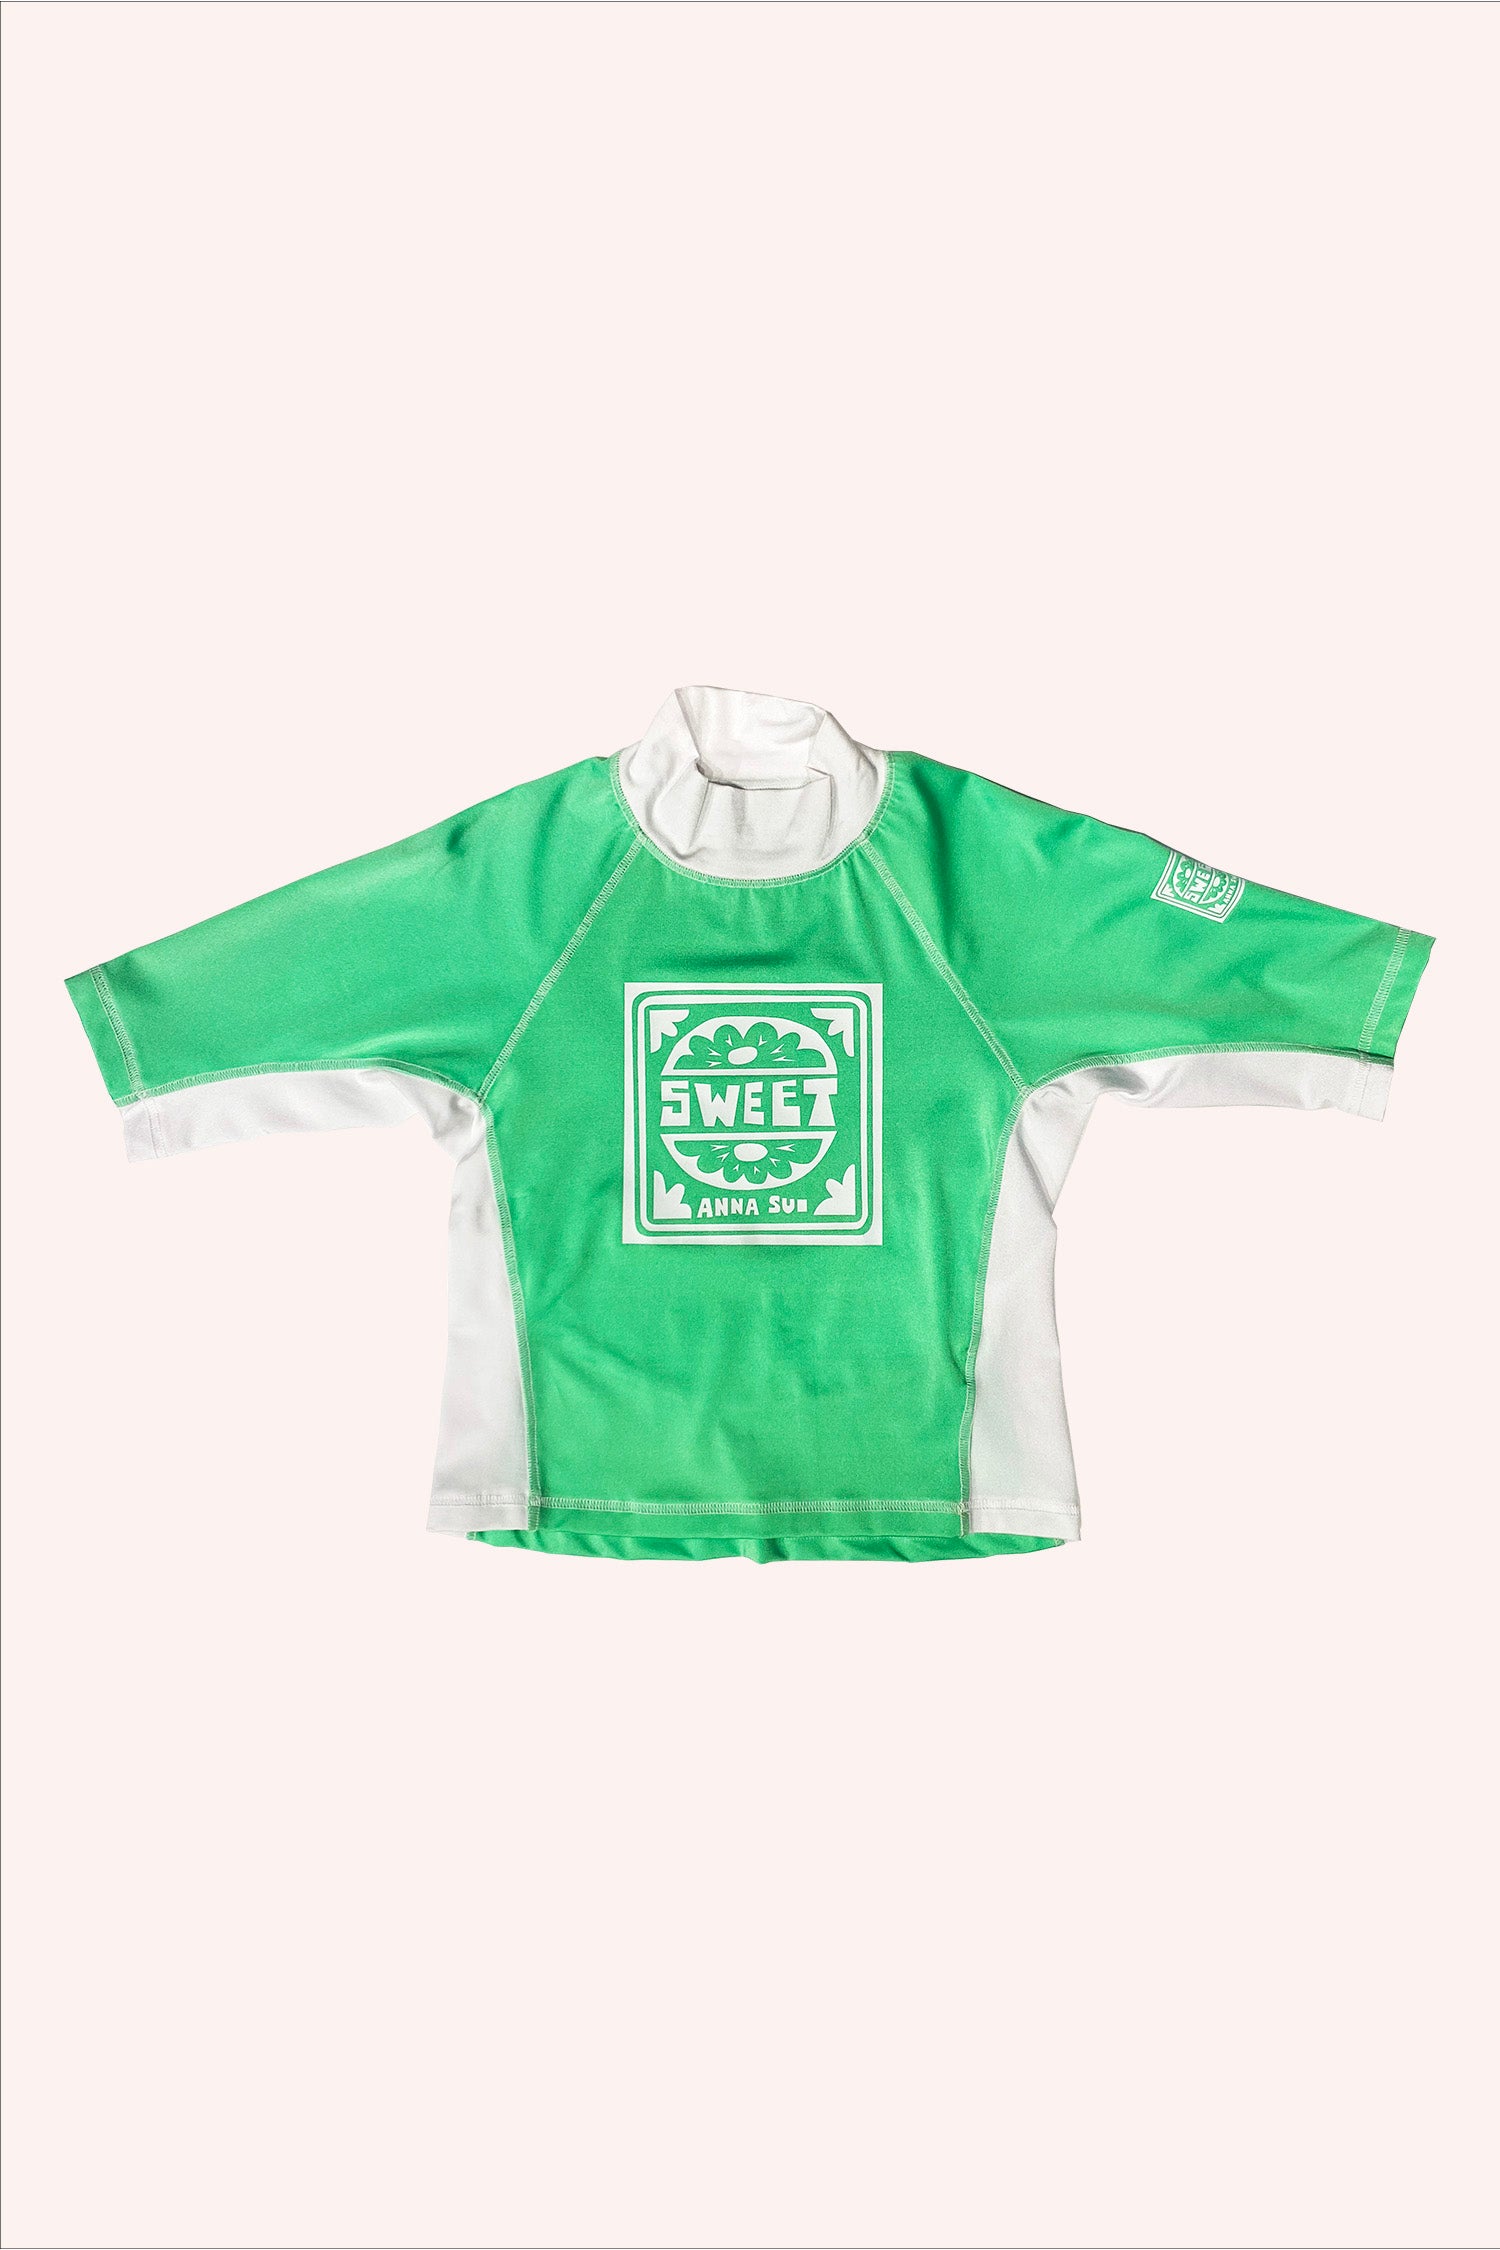 Top, Glo Green, a print in front, white on green, in a square a round stylized flower with a cap word SWEET and A.S. label